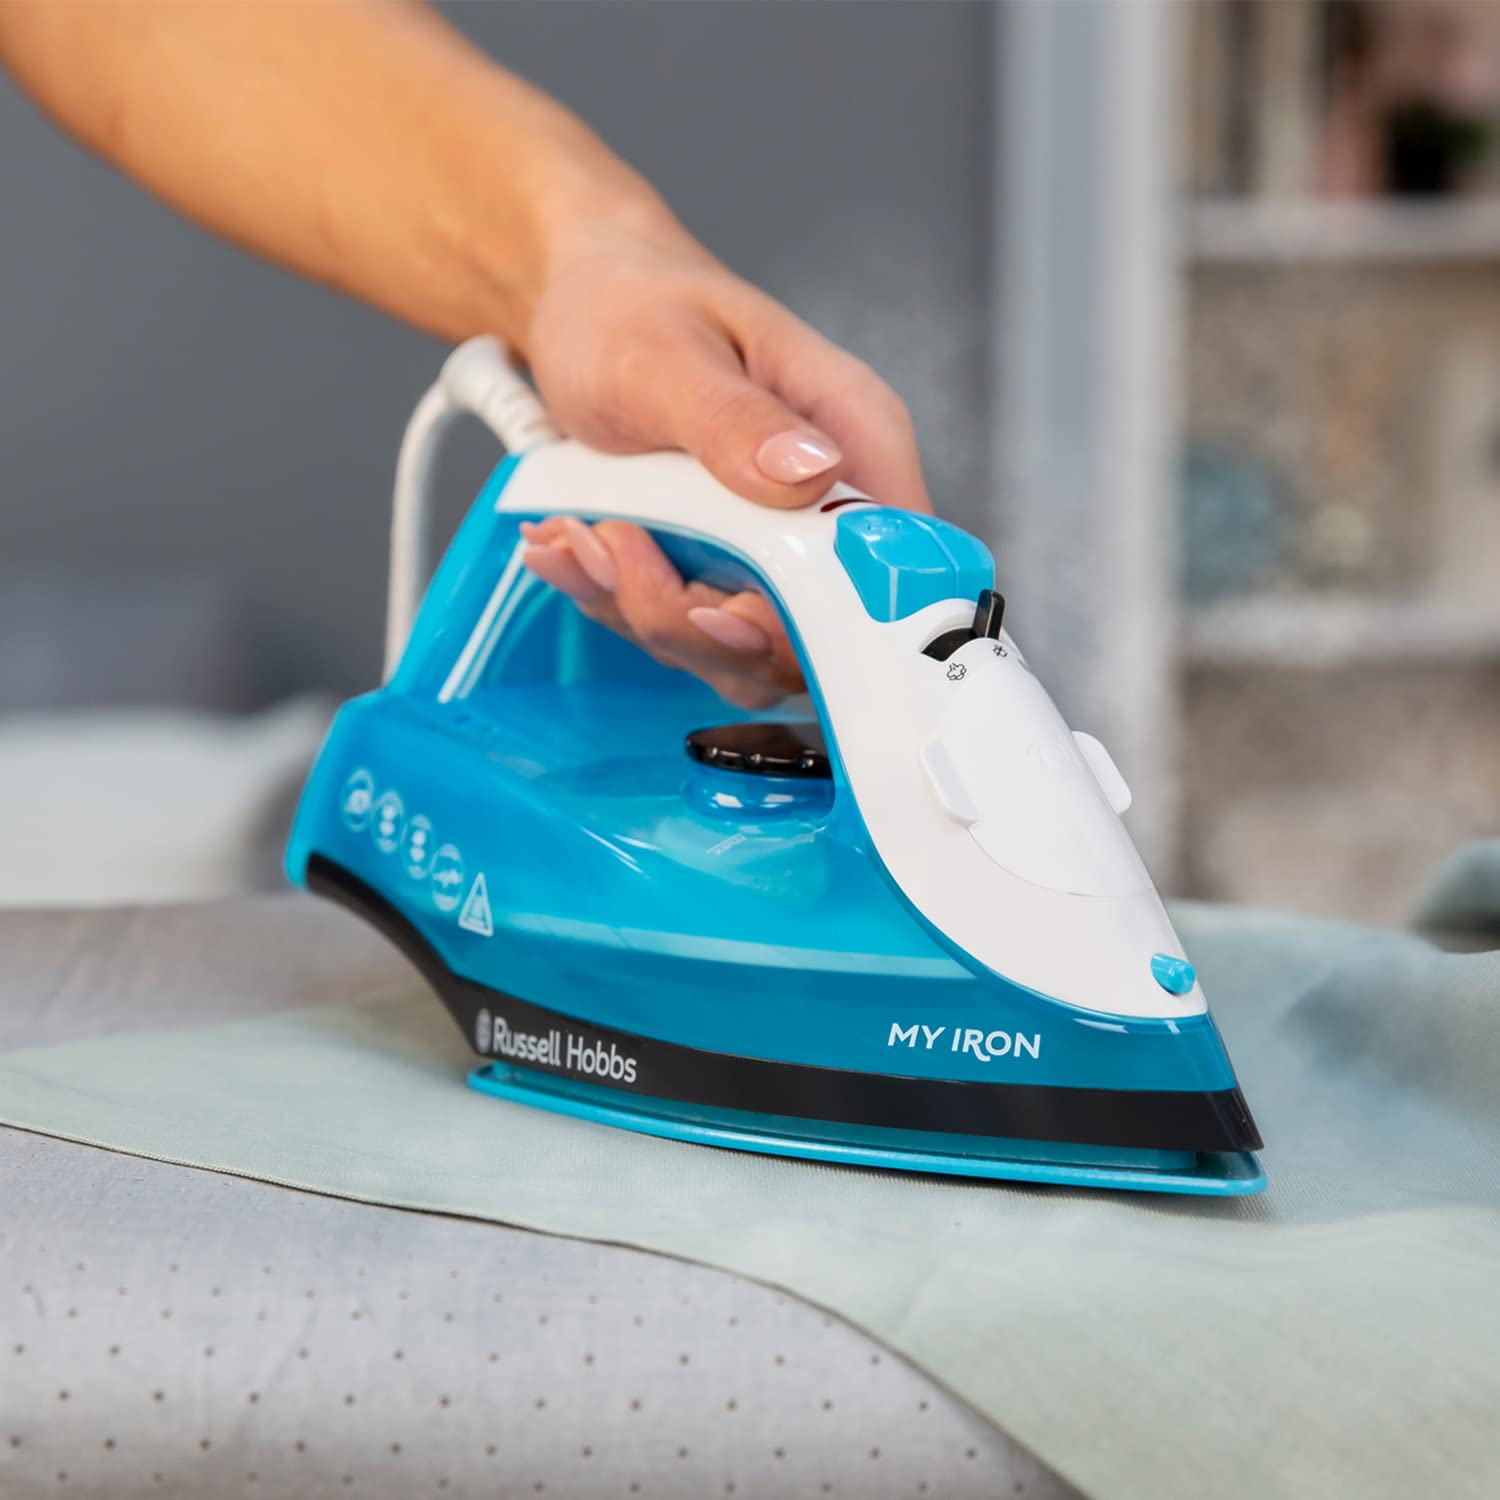 Russell Hobbs 1800W My Iron Steam Iron, Ceramic Soleplate, 260 ml Water Tank with 2m Power Cord, Self-Clean Function and Two Metre Power Cable, 25580 (Blue and White)